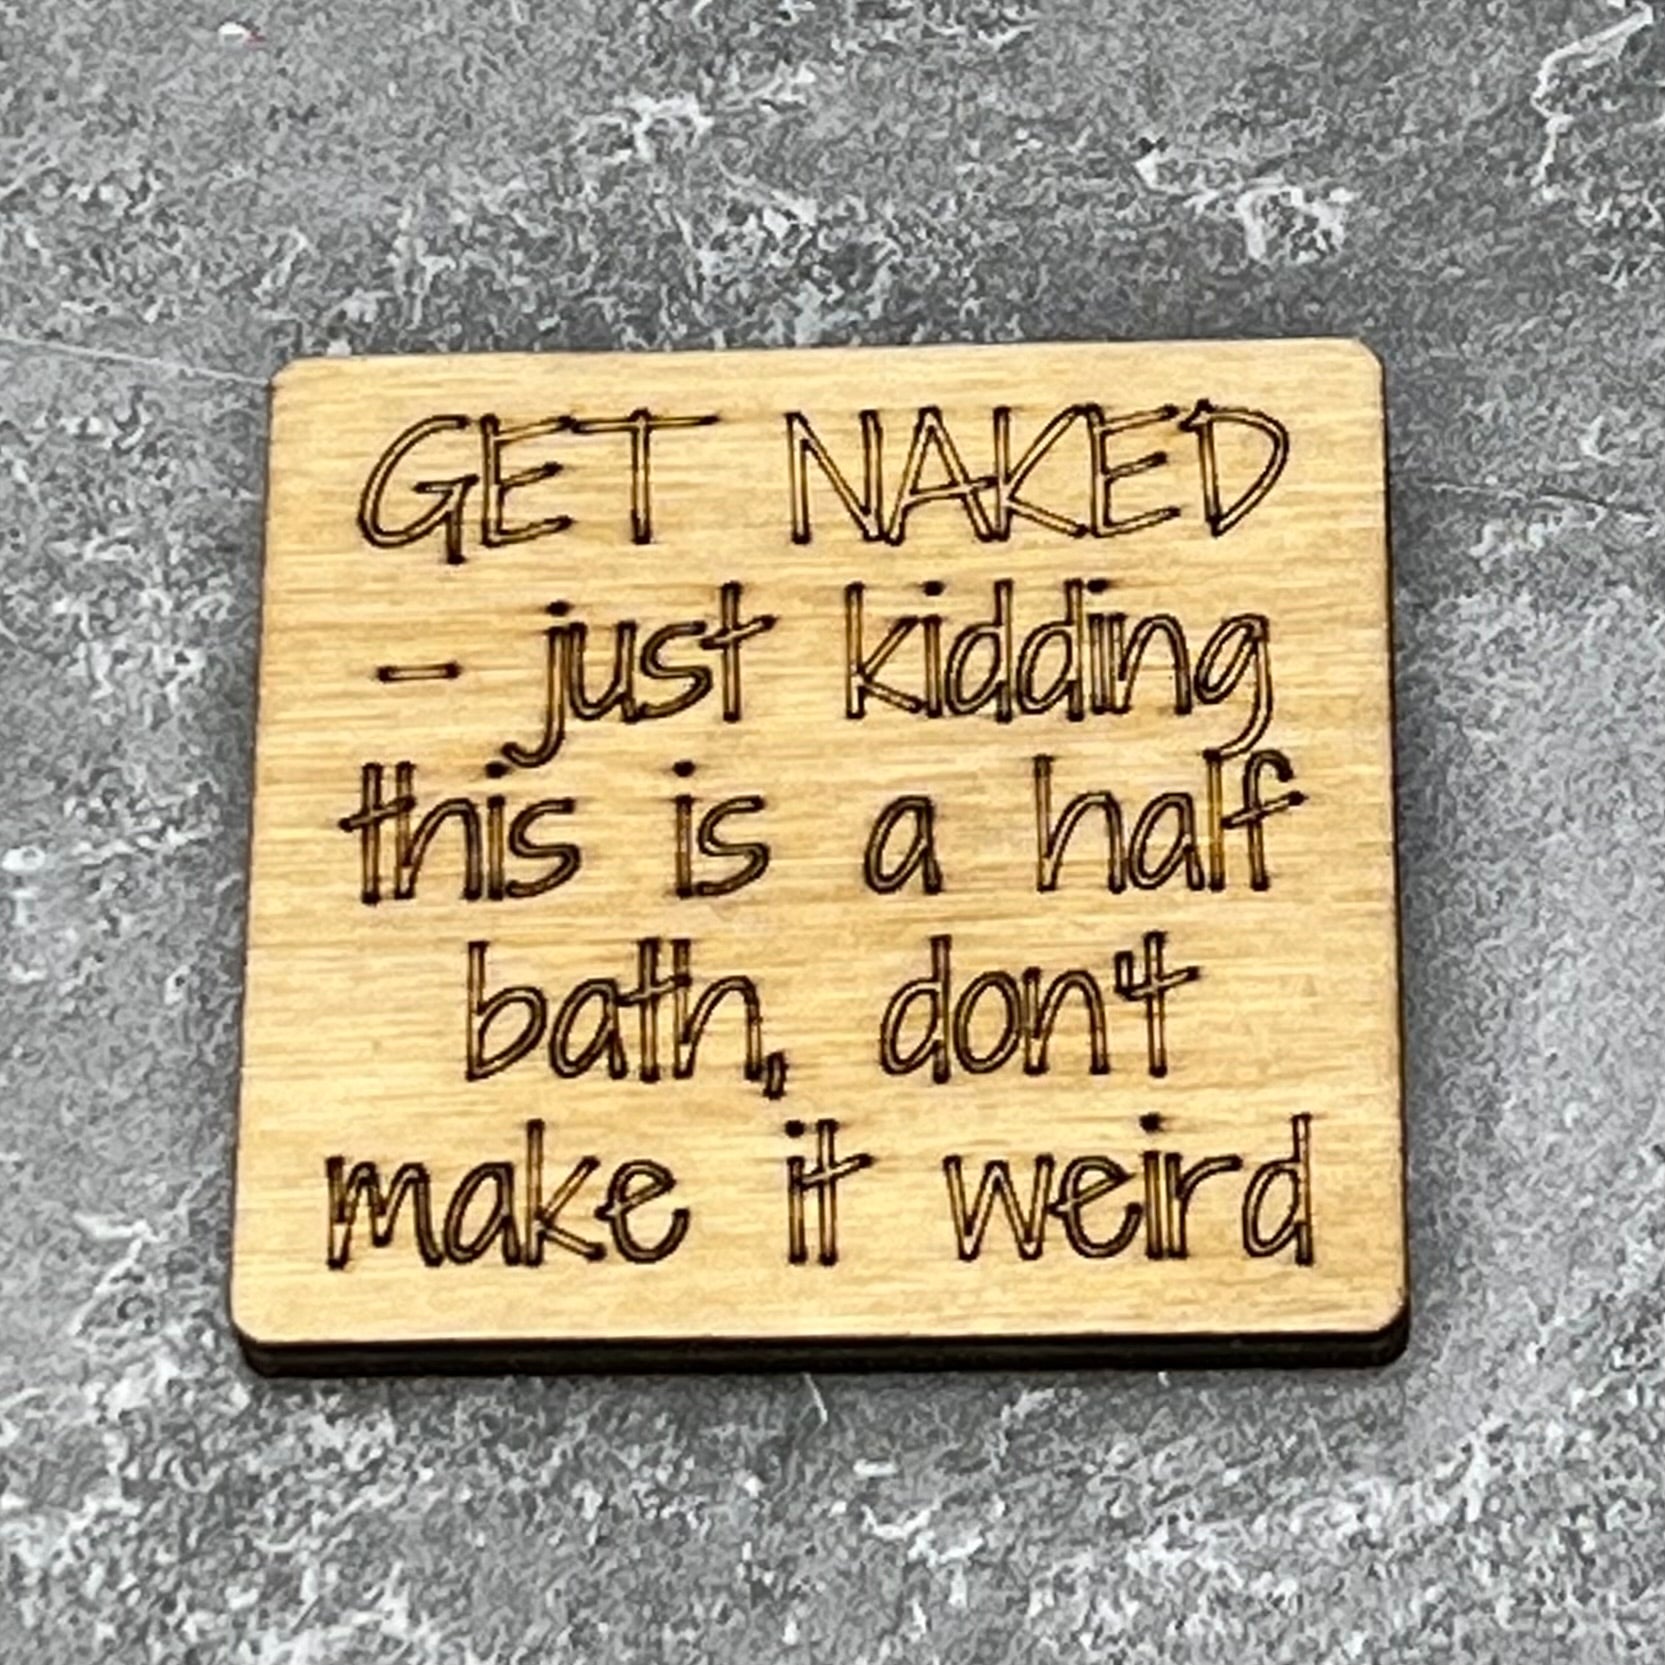 2" wood square with “Get naked …just kidding this is a half bath, don’t male it weird“ laser engraved